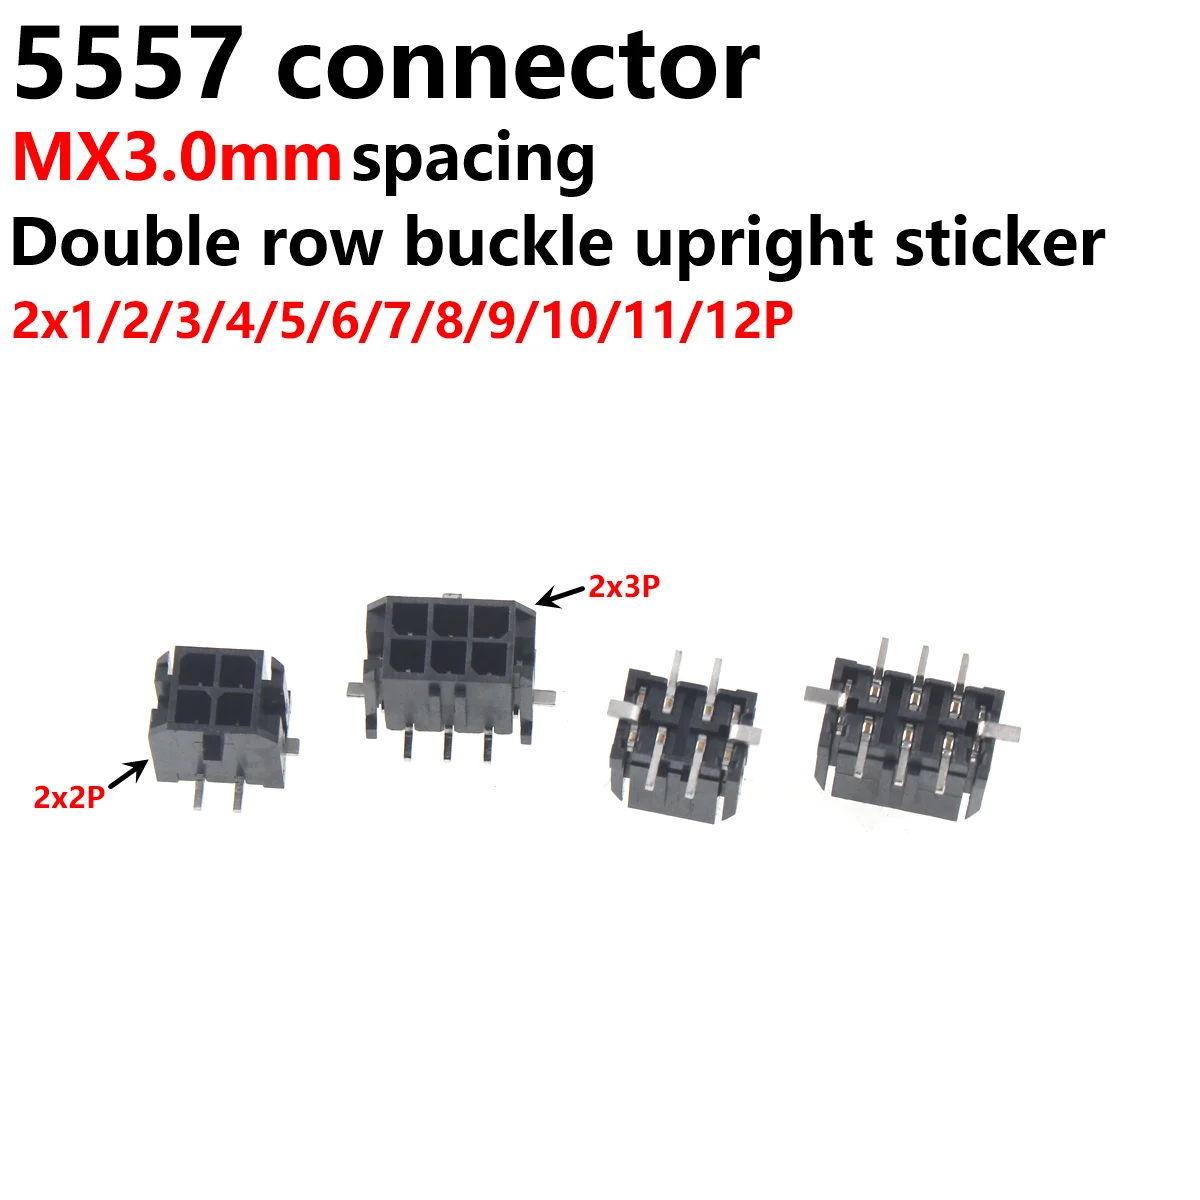 10pcs Micro-fit MX3.0 3.0mm Connector Double Row SMT SMD Type 2P 4P 6P 8P 10 12 14 24pin 43045 receptacle Socket 5 10pcs 100% new 0475890001 47589 0001 475890001 micro usb ab 5pin new original connector